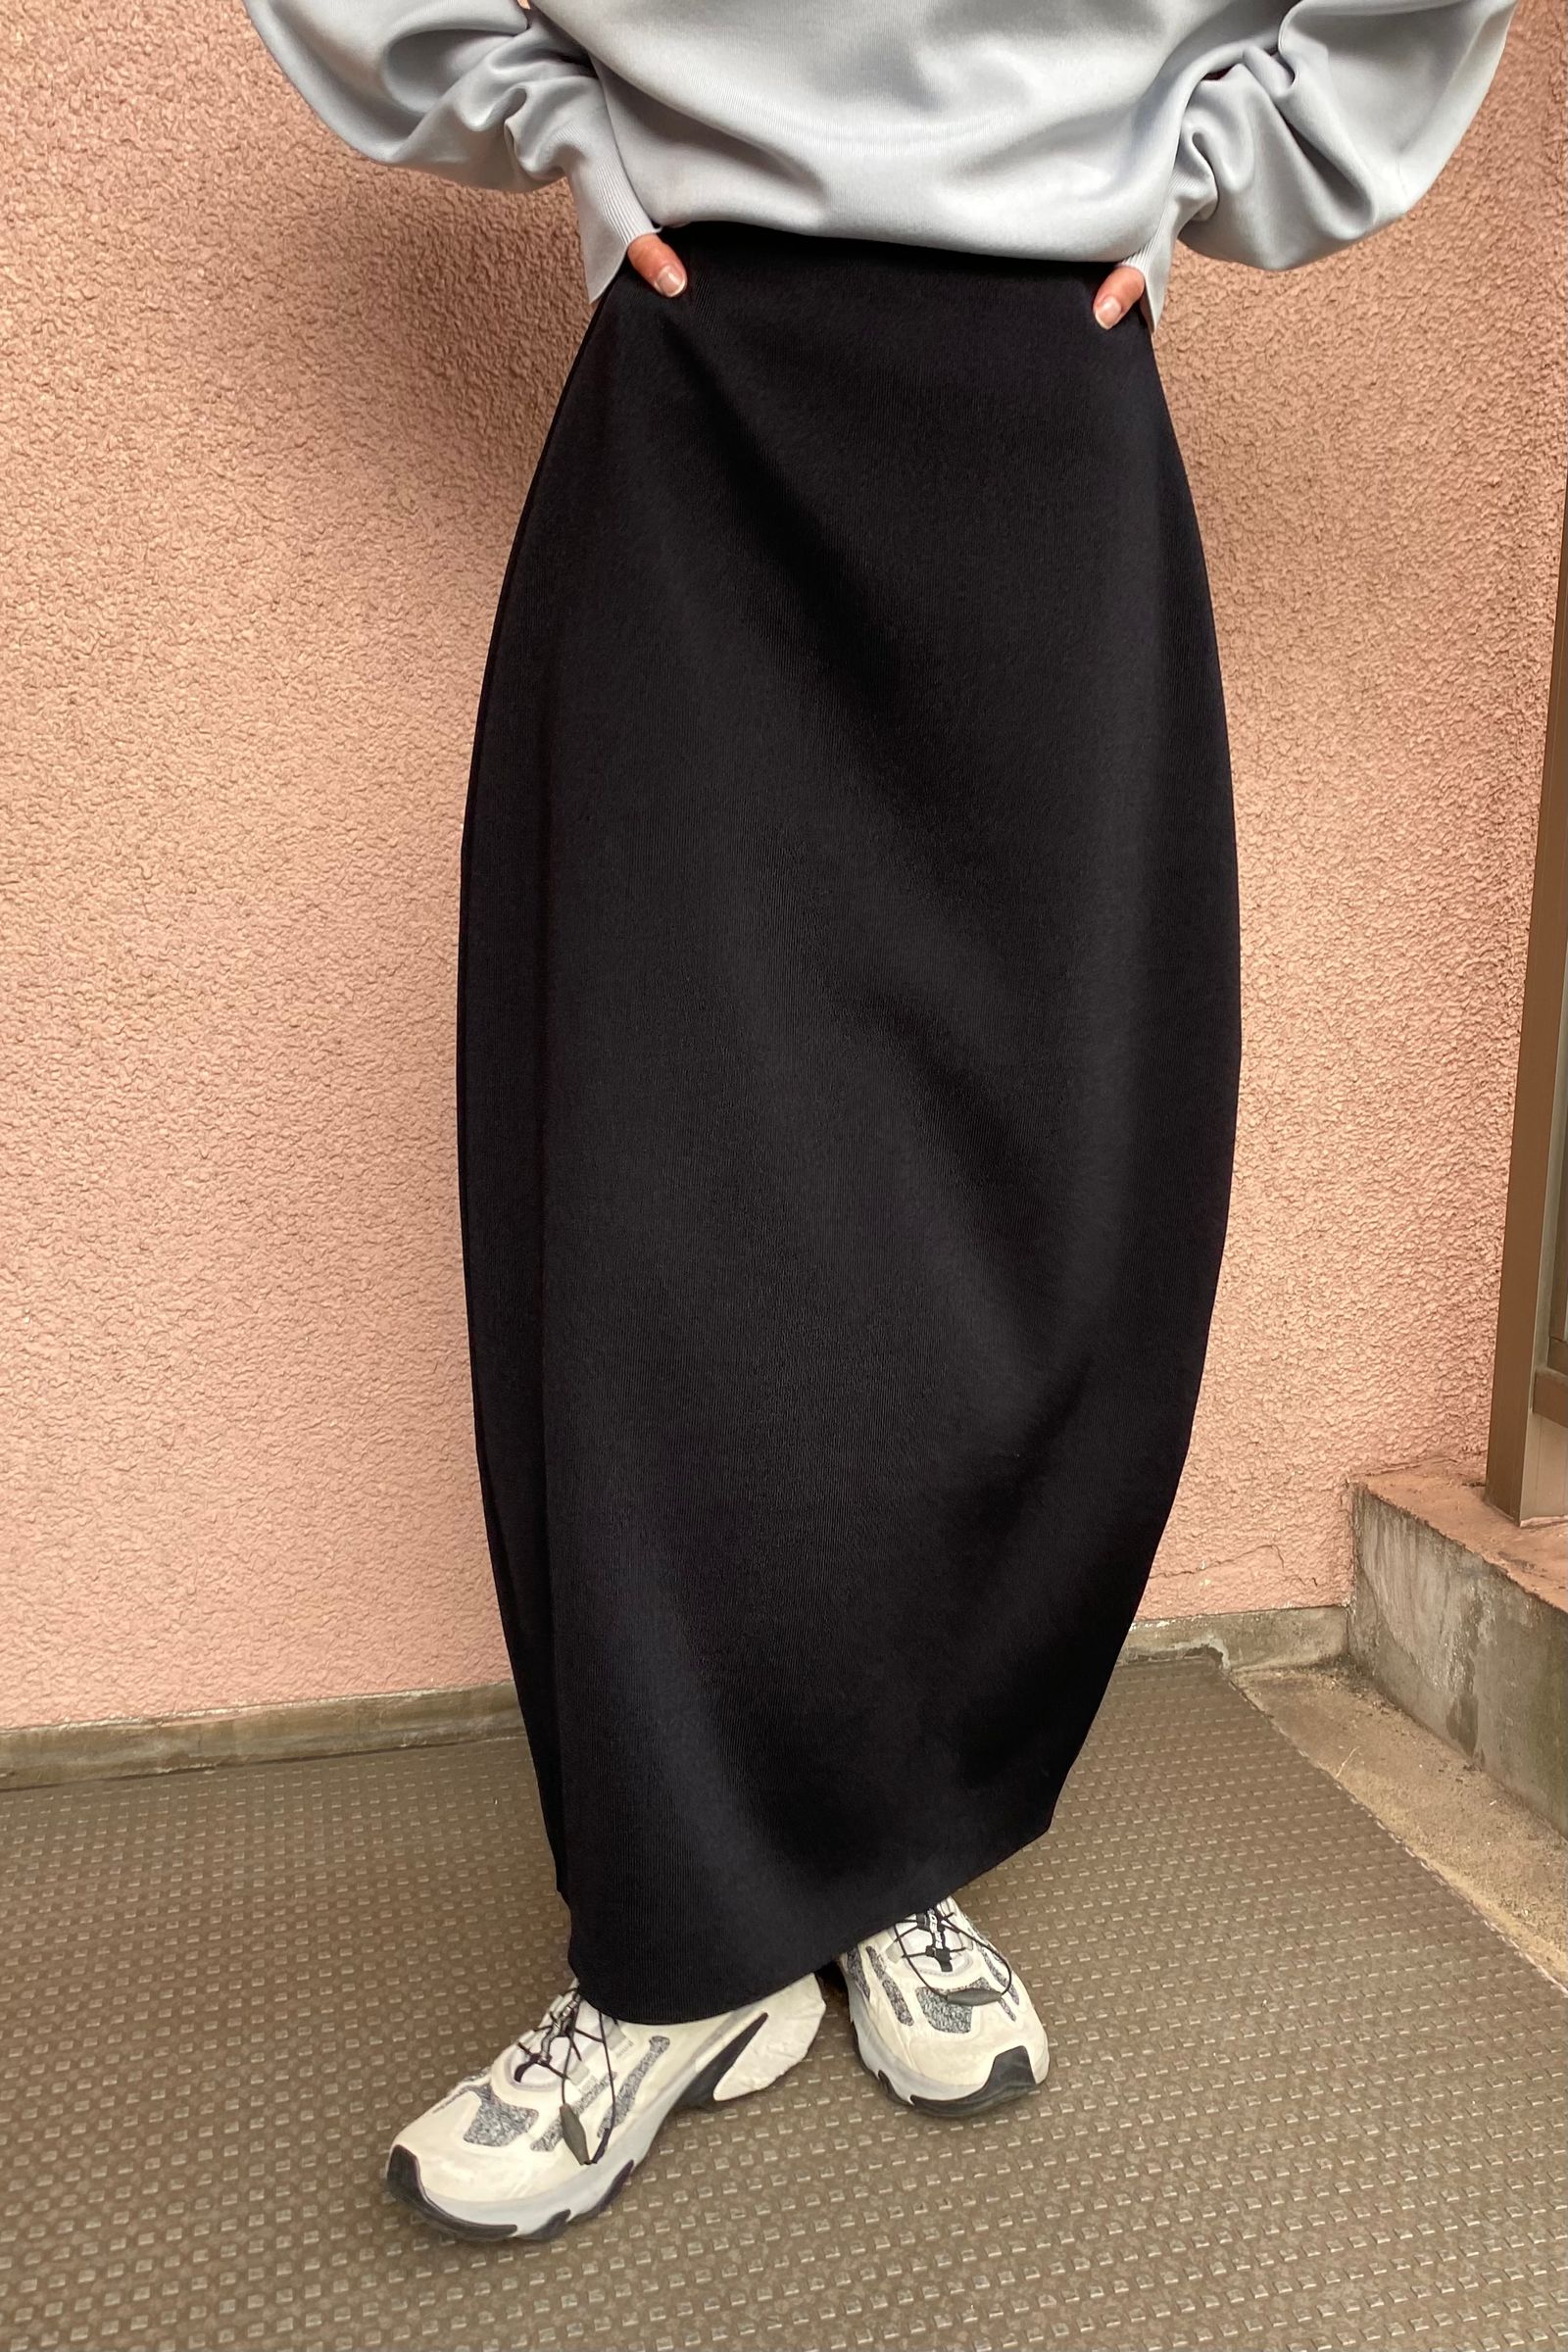 IIROT (イロット) 2023ss Air Knit Skirt-